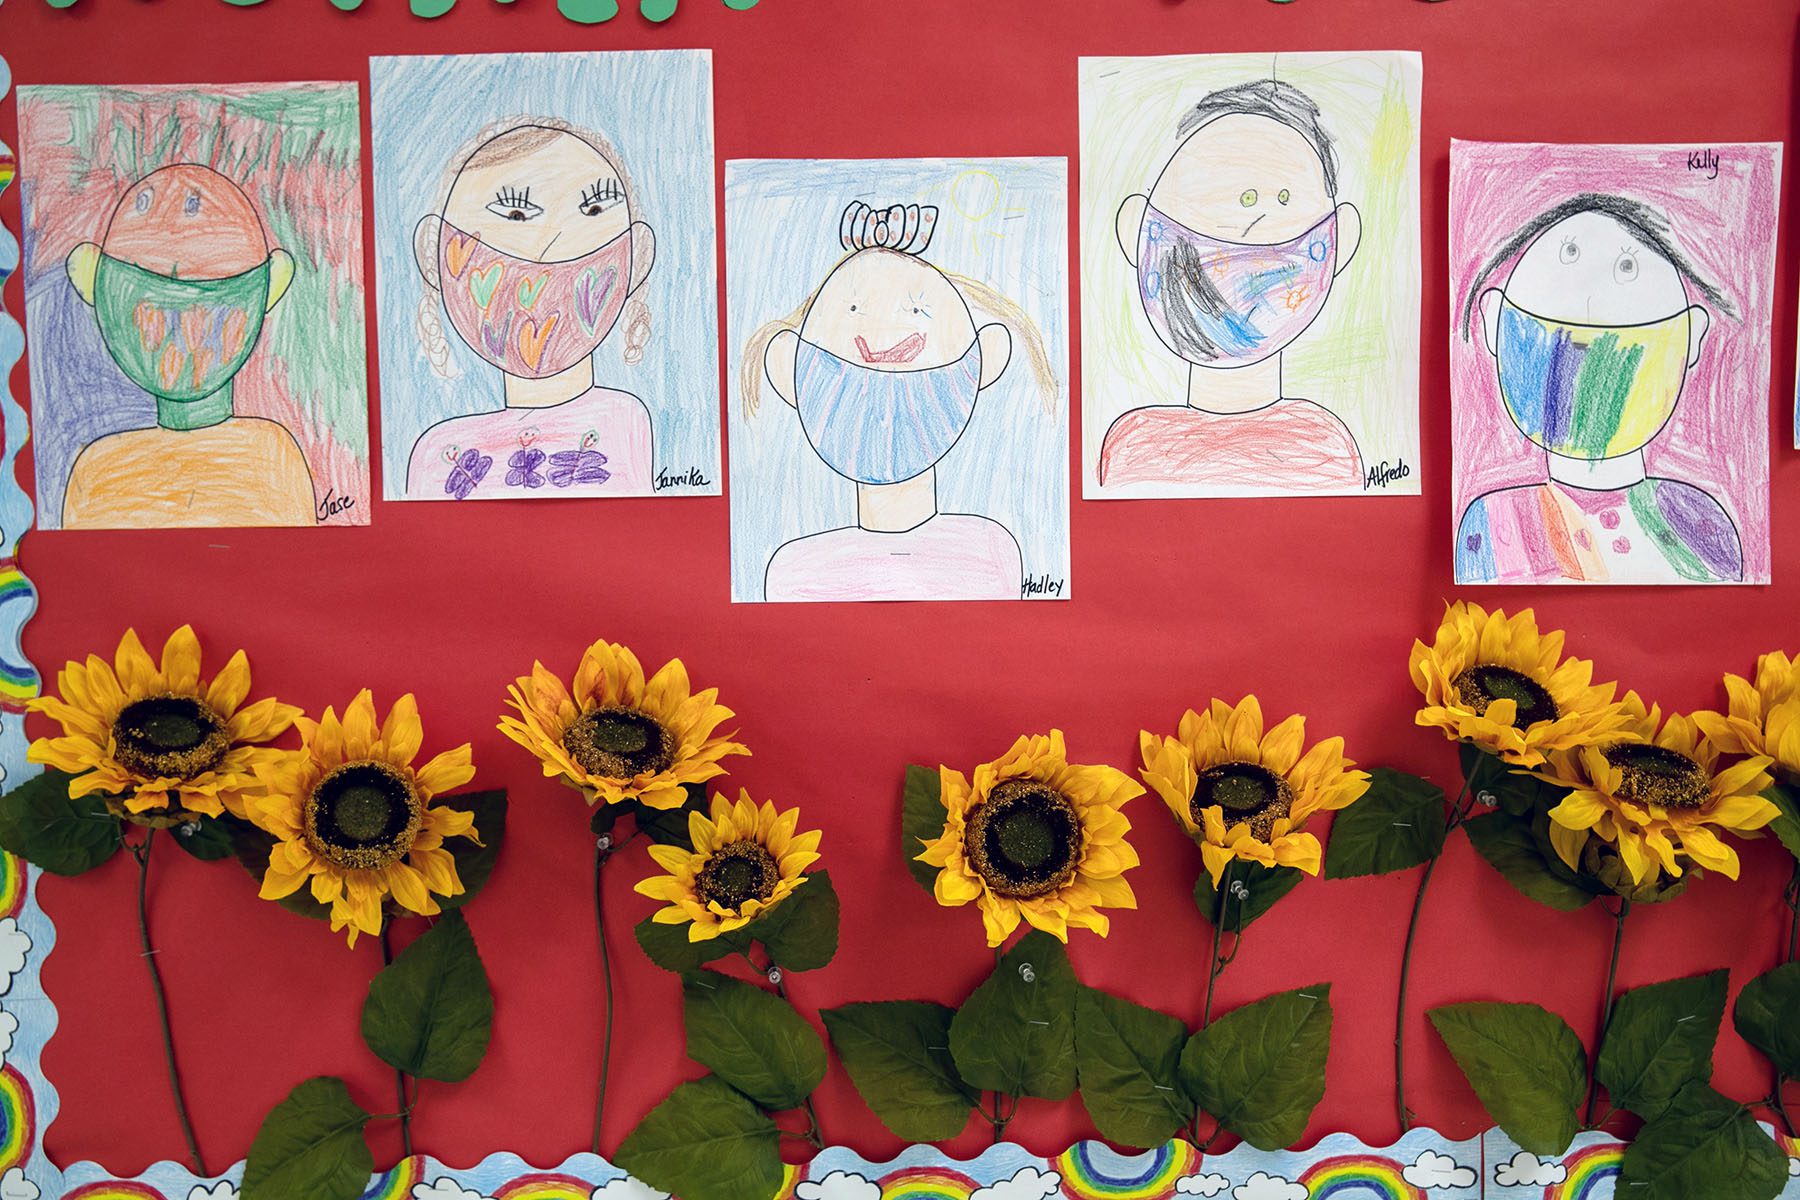 Drawings of children wearing masks adorn a hallway.